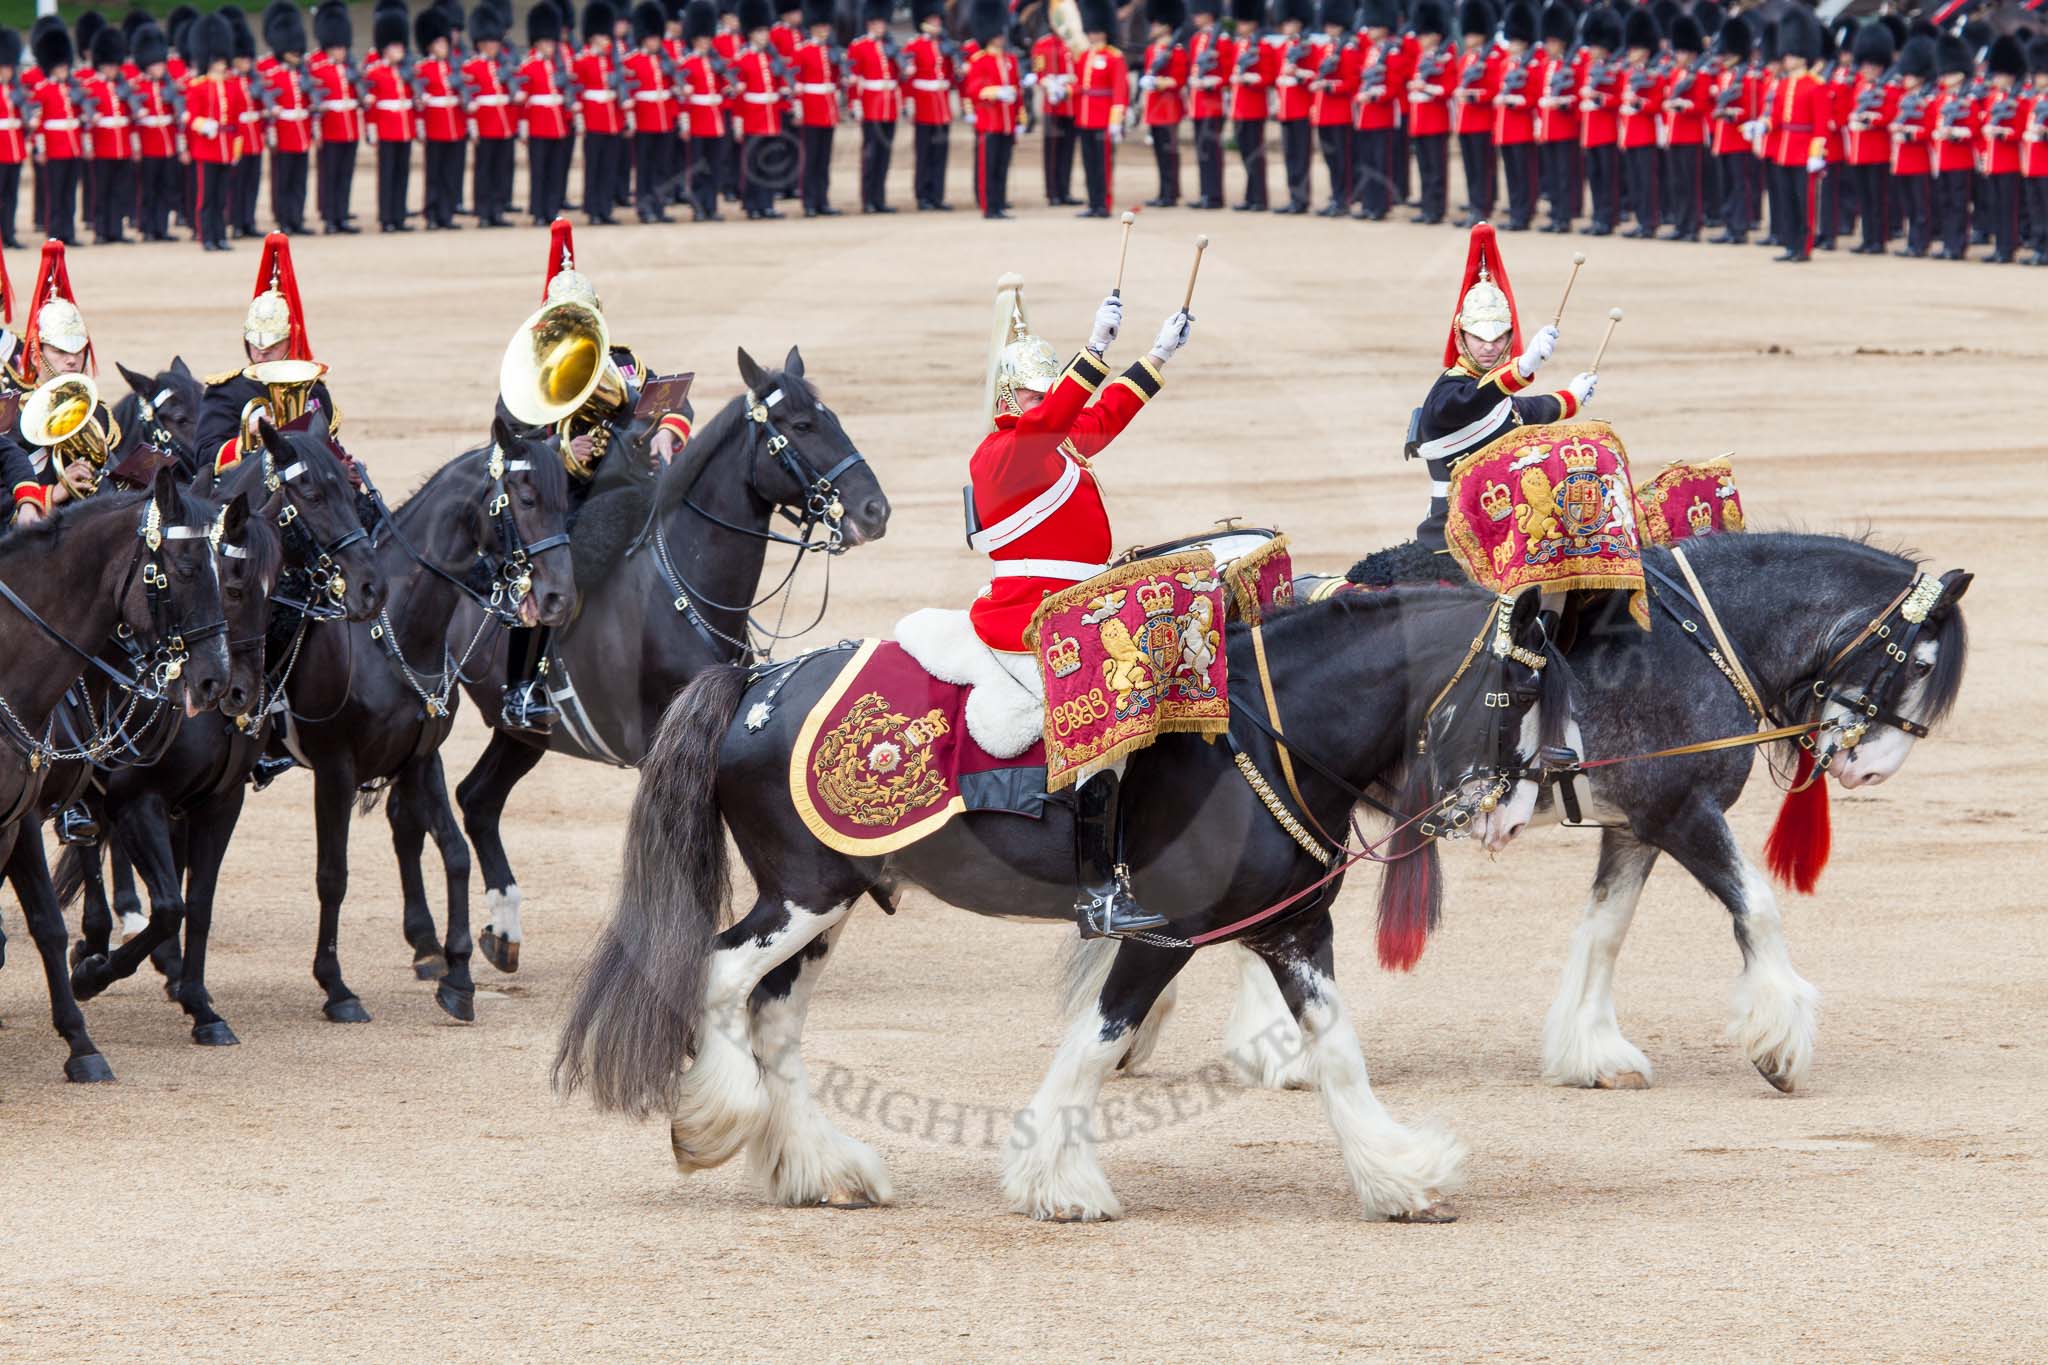 Major General's Review 2013: The two kettle drummers, about to salute Her Majesty, as the Mounted Bands are about to march off..
Horse Guards Parade, Westminster,
London SW1,

United Kingdom,
on 01 June 2013 at 11:58, image #660